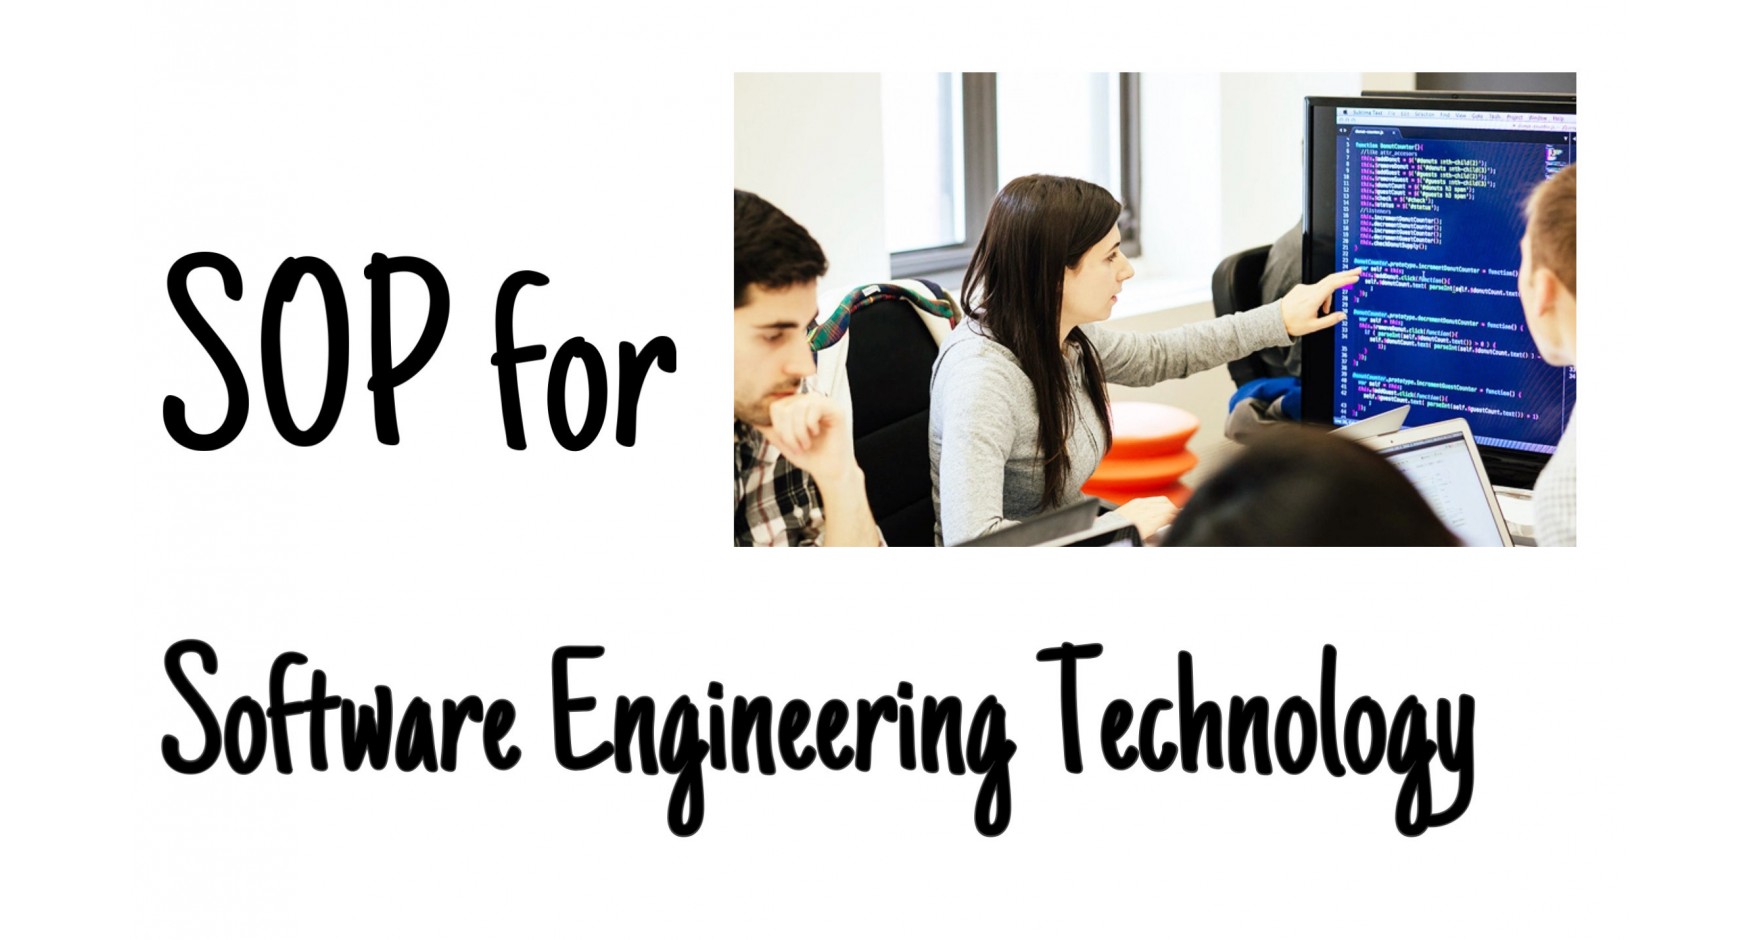 How to write SOP for Software Engineering Technology?